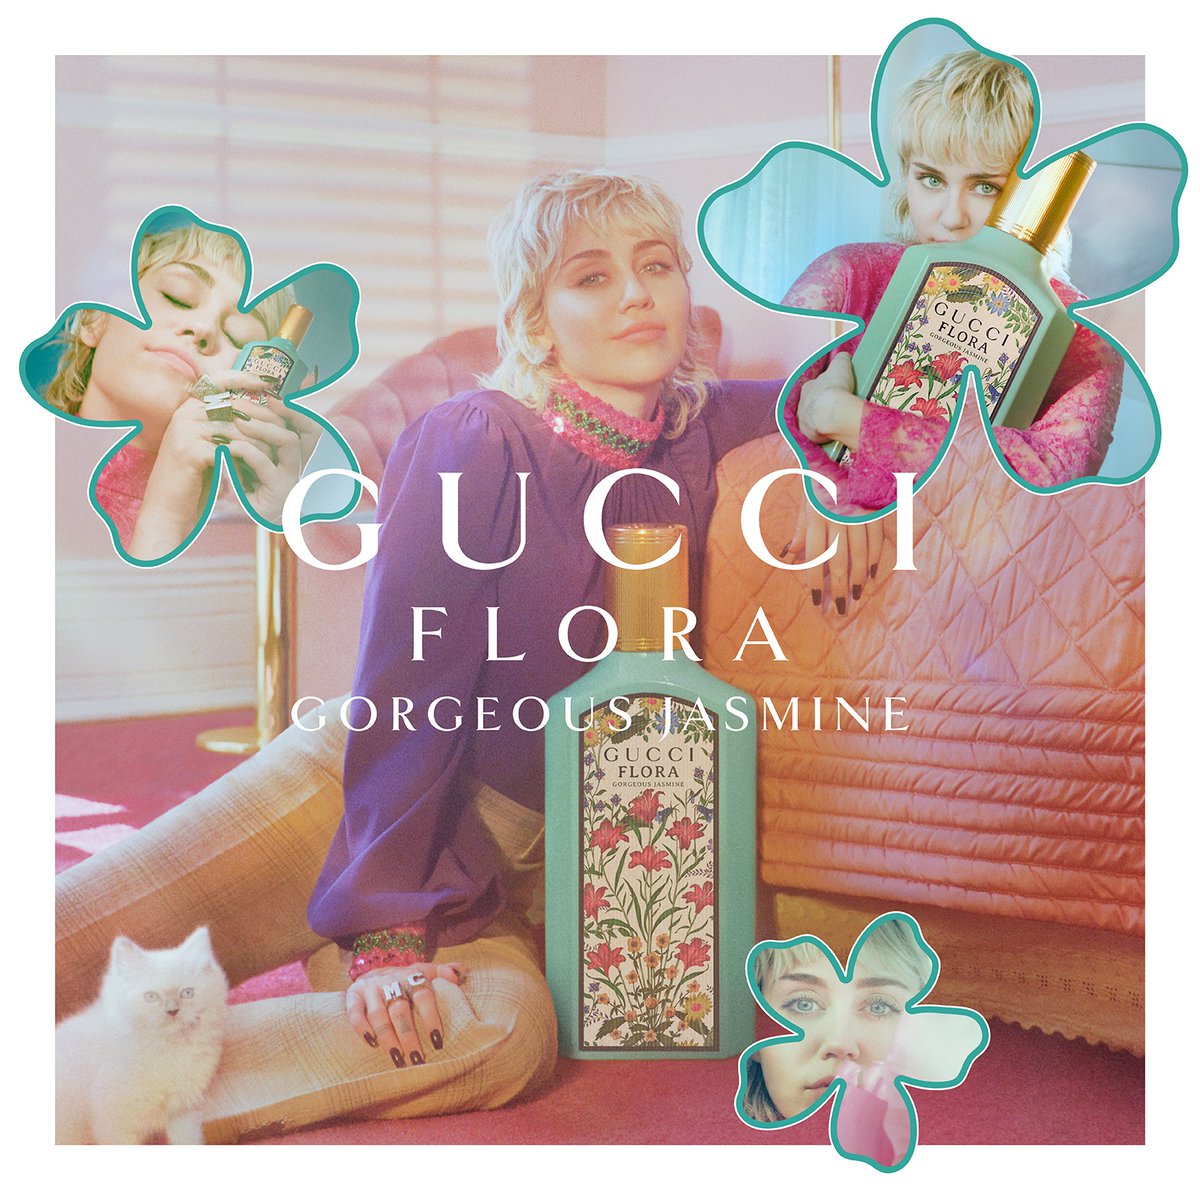 Presenting the new Gucci Flora Gorgeous Jasmine Eau De Parfum, the latest #FloraFantasy chapter appearing in the joy-fueled campaign starring @MileyCyrus. #AlessandroMichele #MileyCyrus #PetraCollins #ChristopherSimmonds on.gucci.com/GucciFloraFrag…